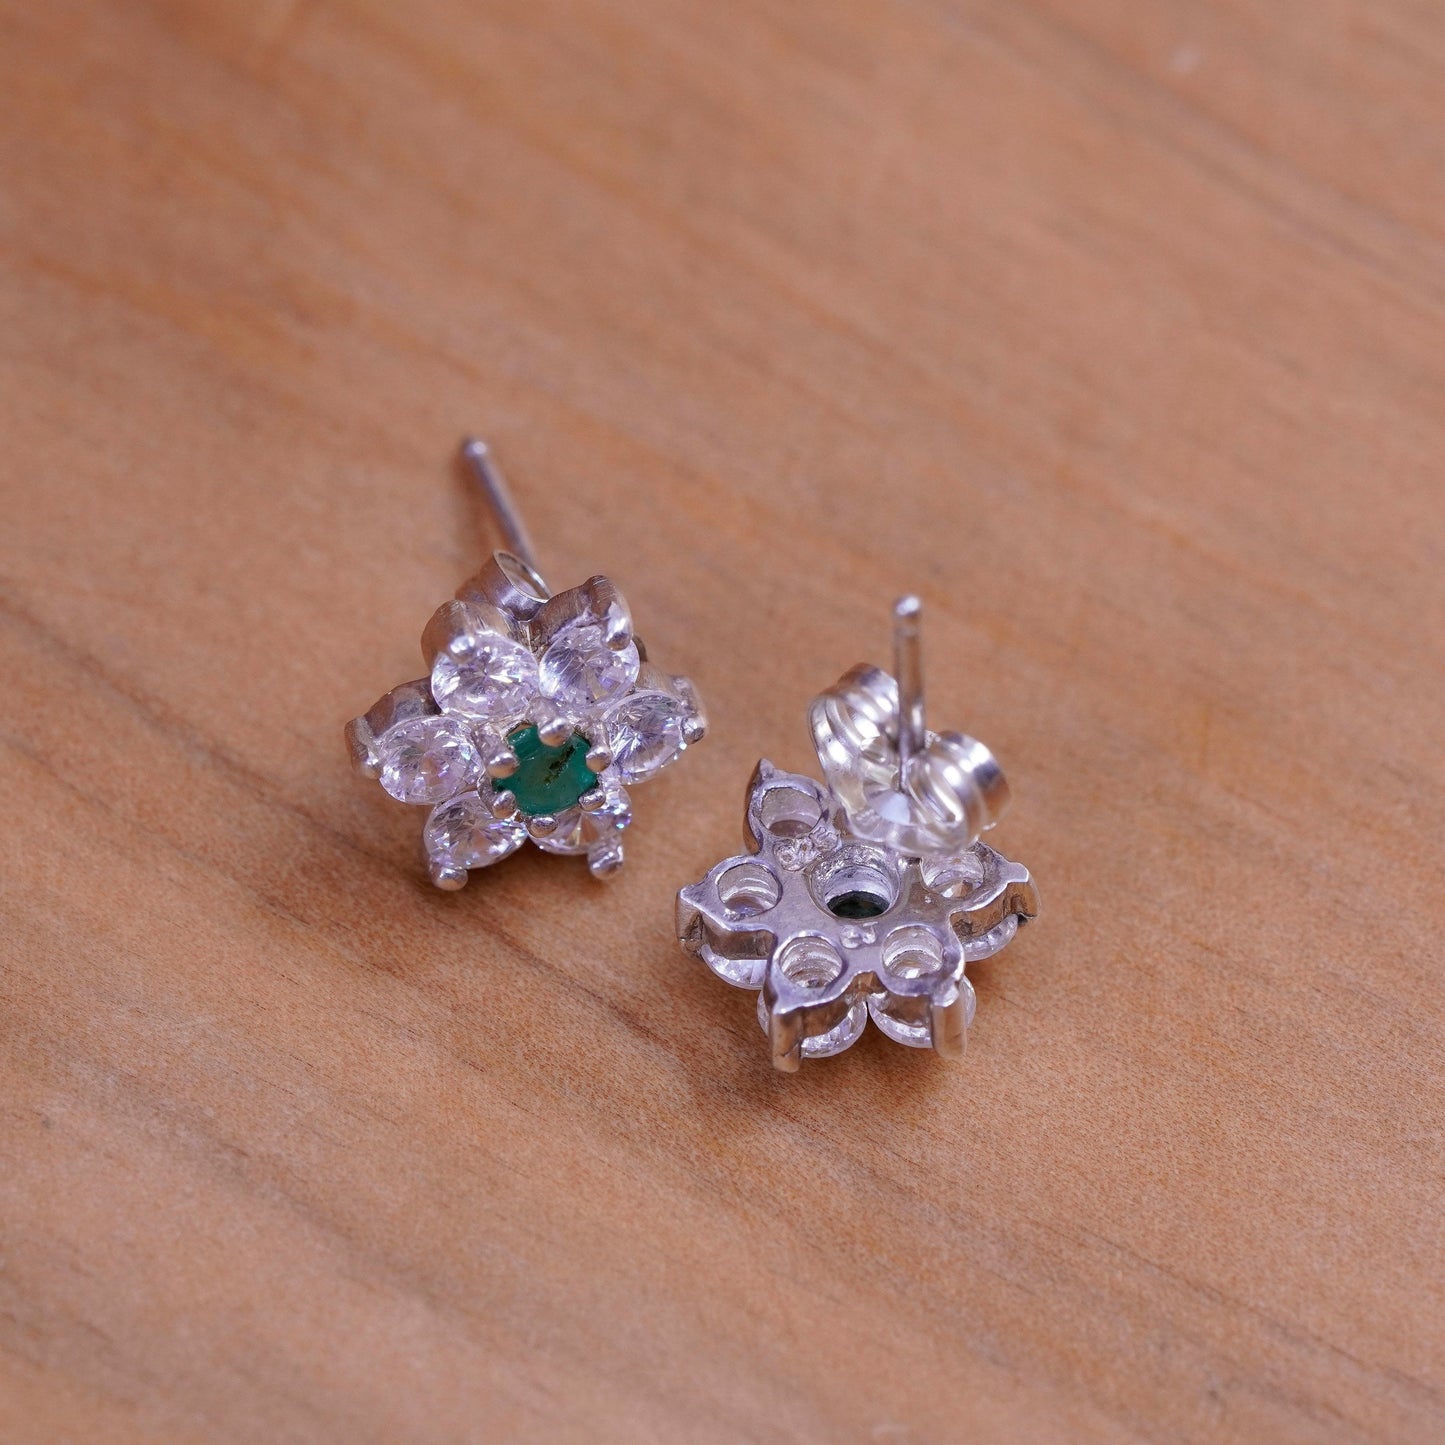 Vintage Vermeil Sterling silver clear flower studs earrings with cz and emerald